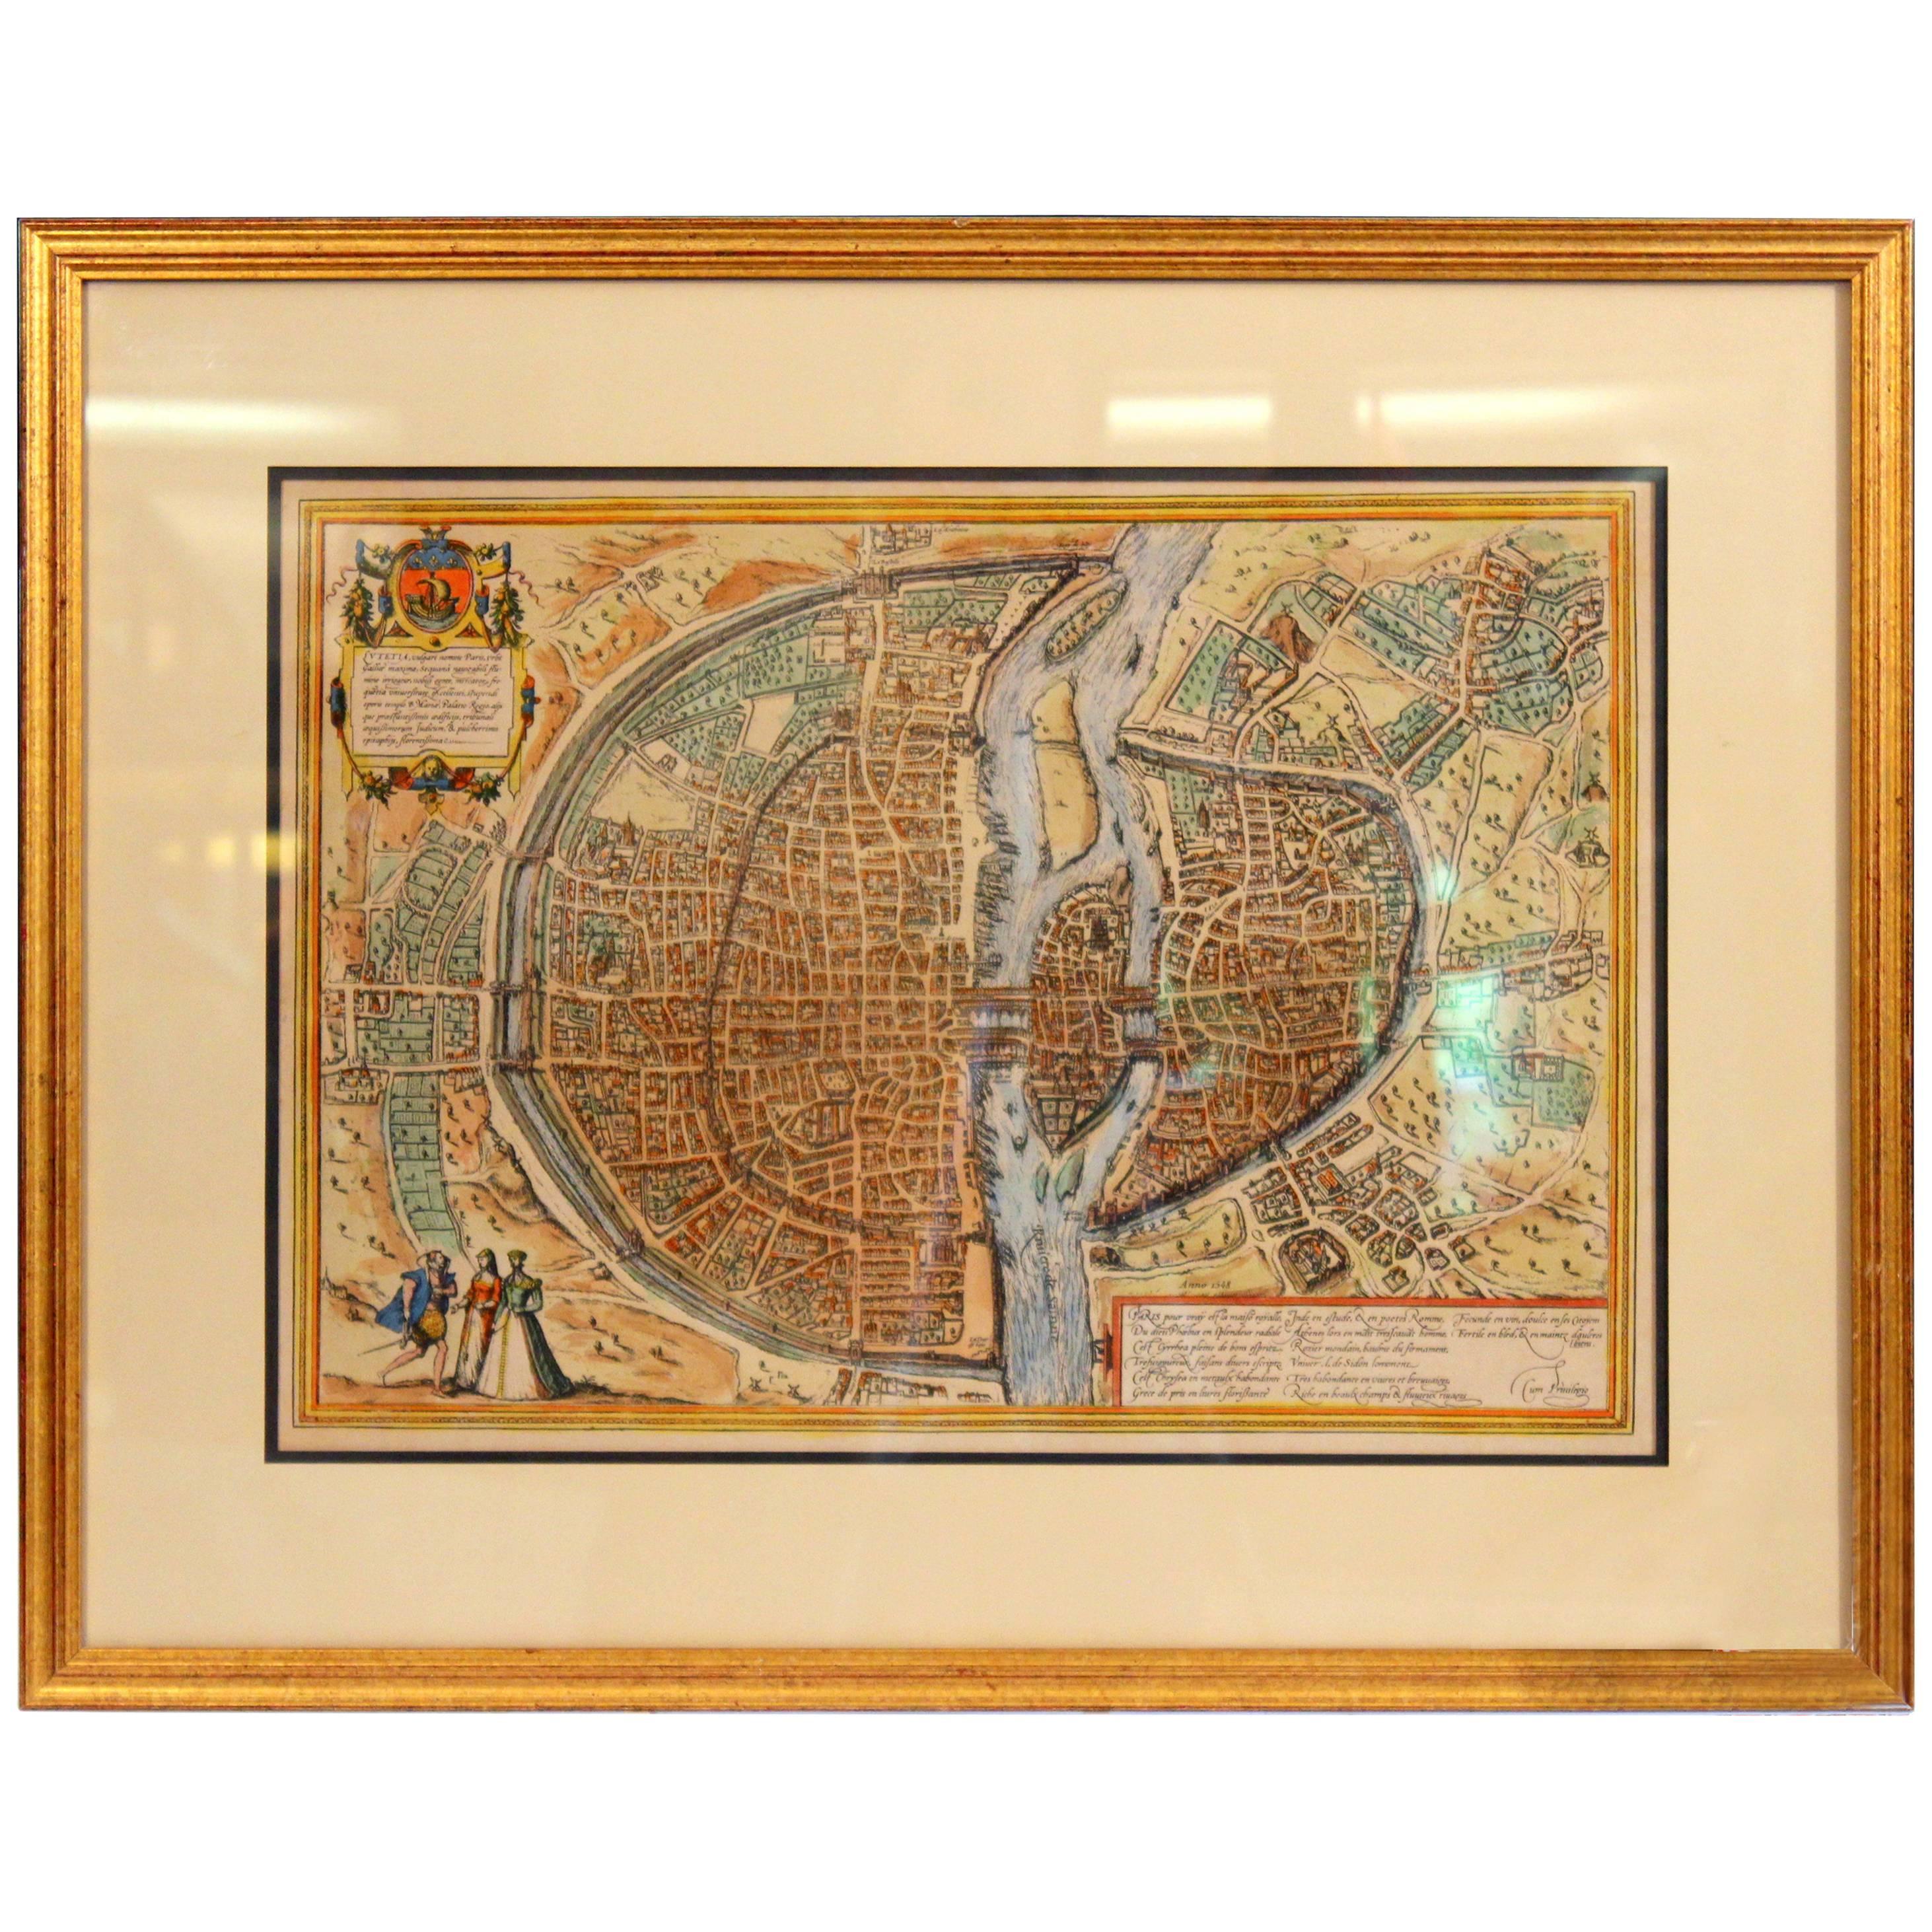 Old Engraving Map of Paris French Munster 16th Century Walled City Framed